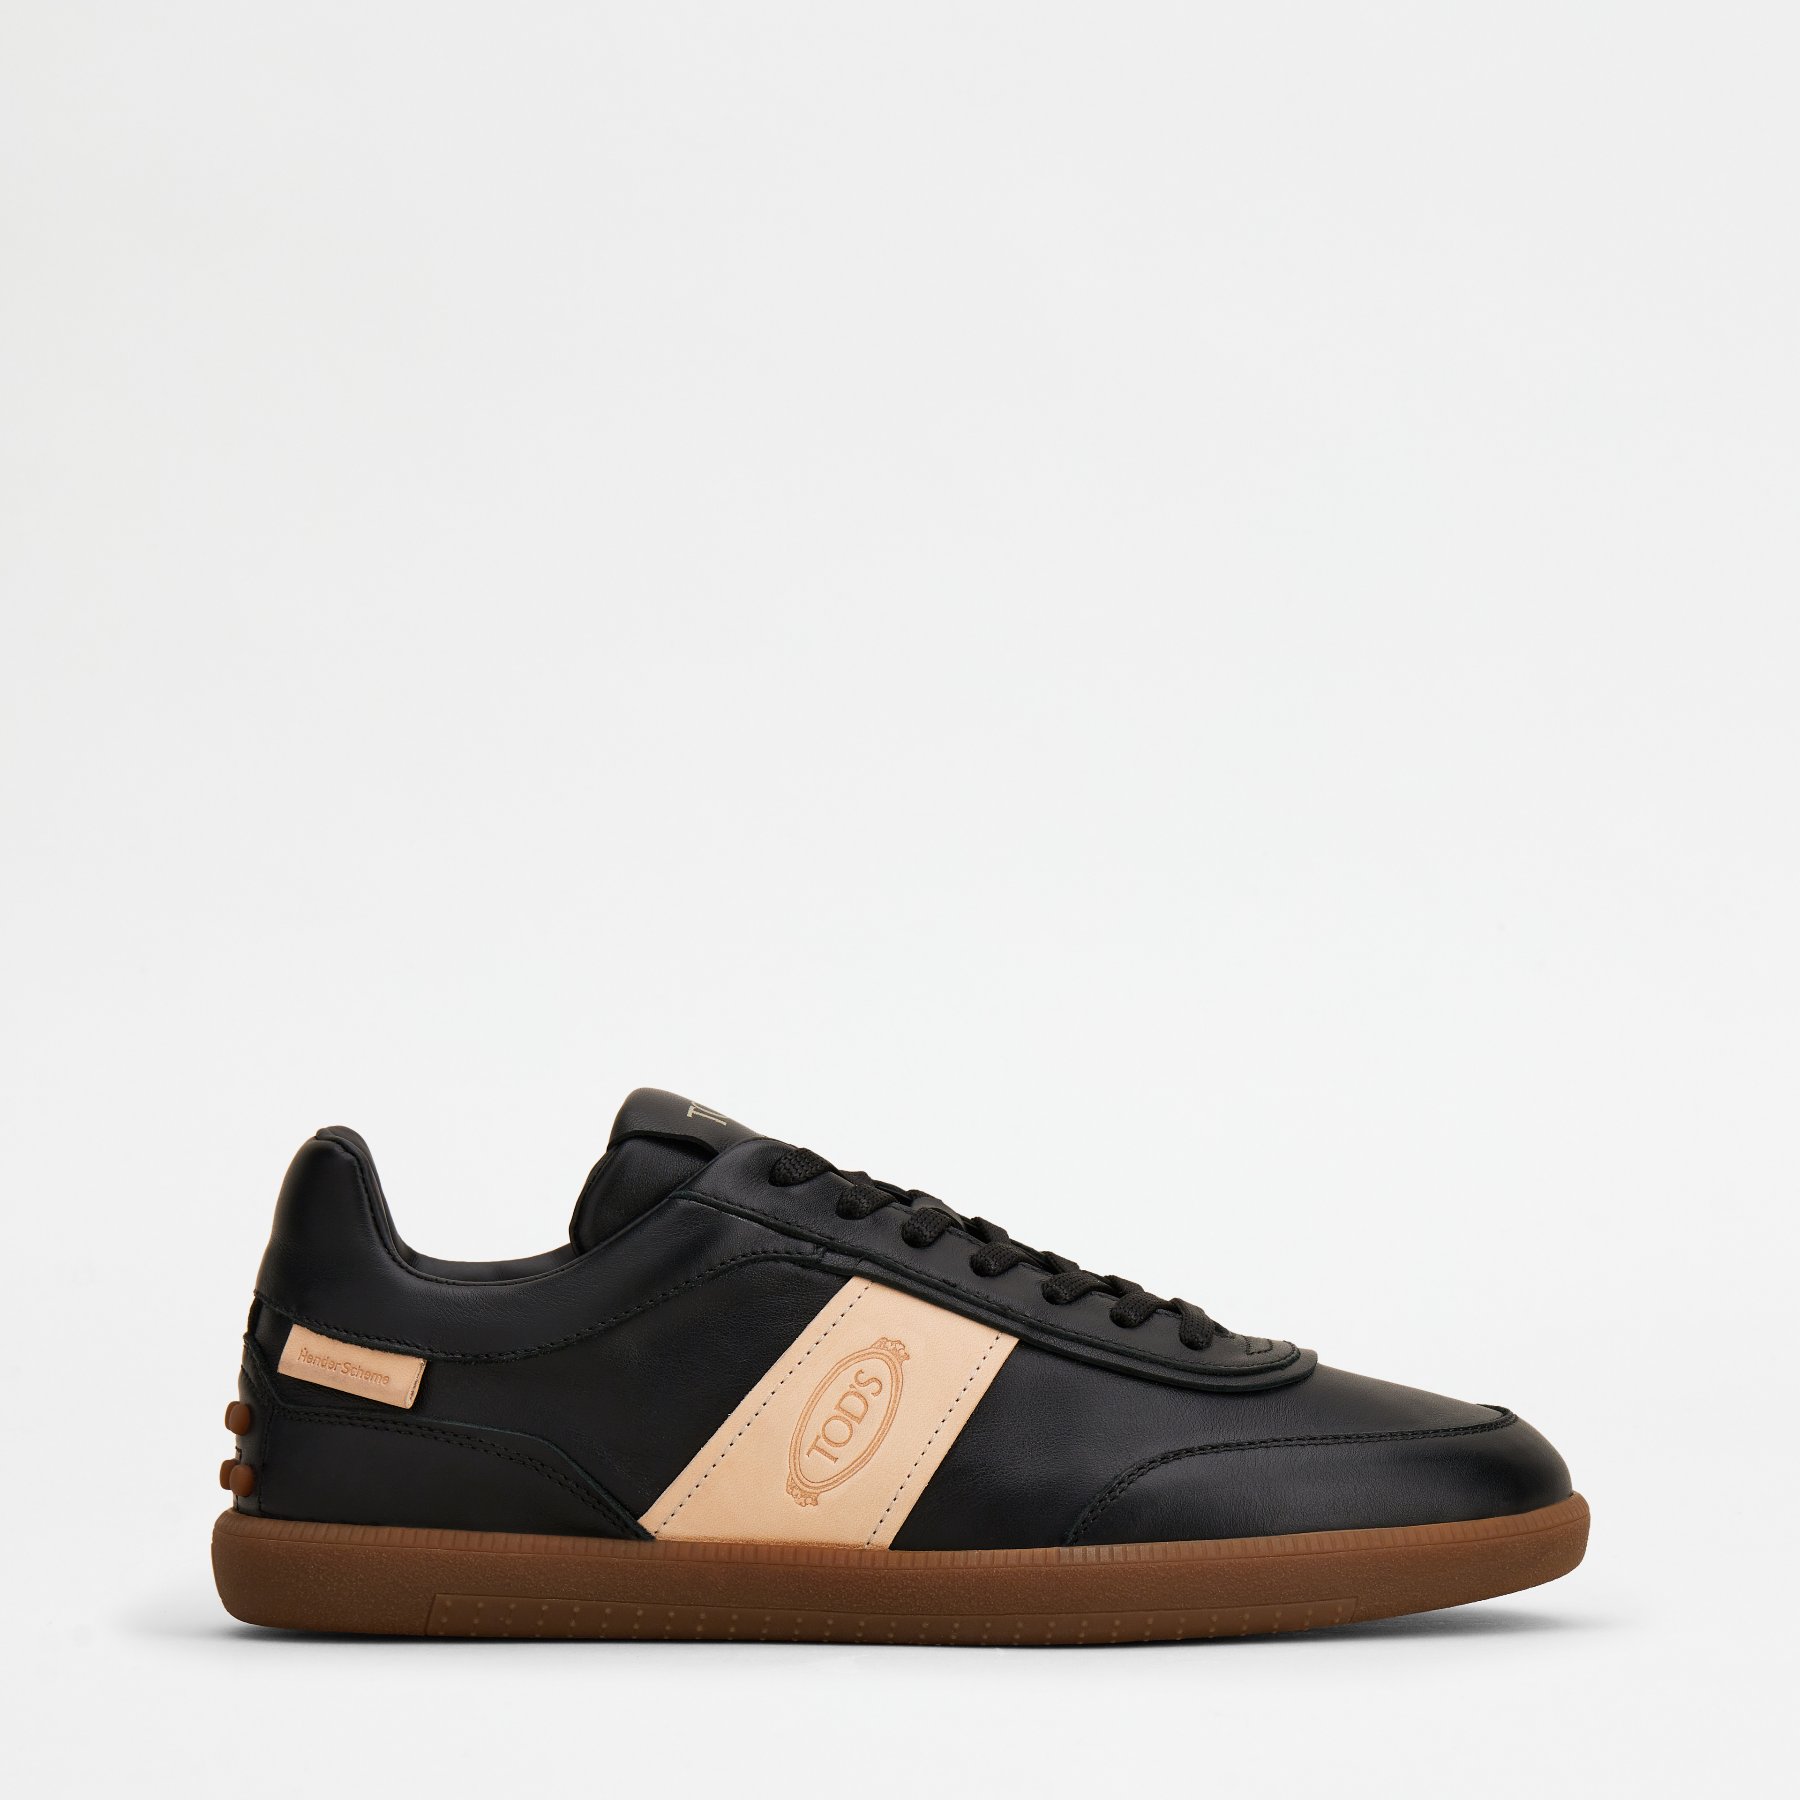 hender-scheme-tods-product-05